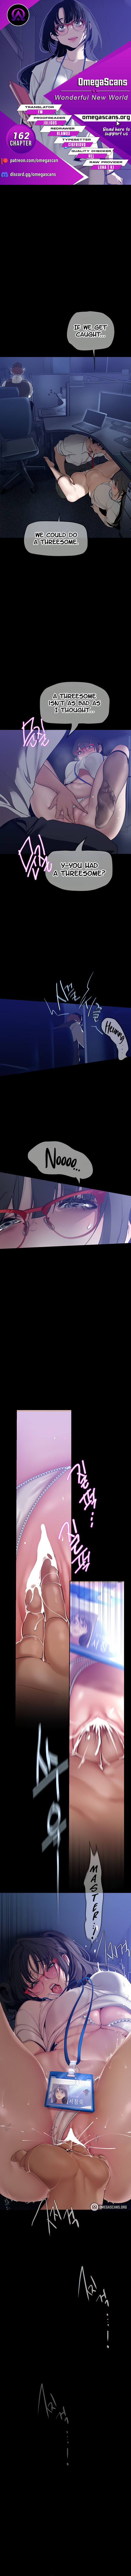 Panel Image 1 for chapter 162 of manhwa A Wonderful New World on read.oppai.stream